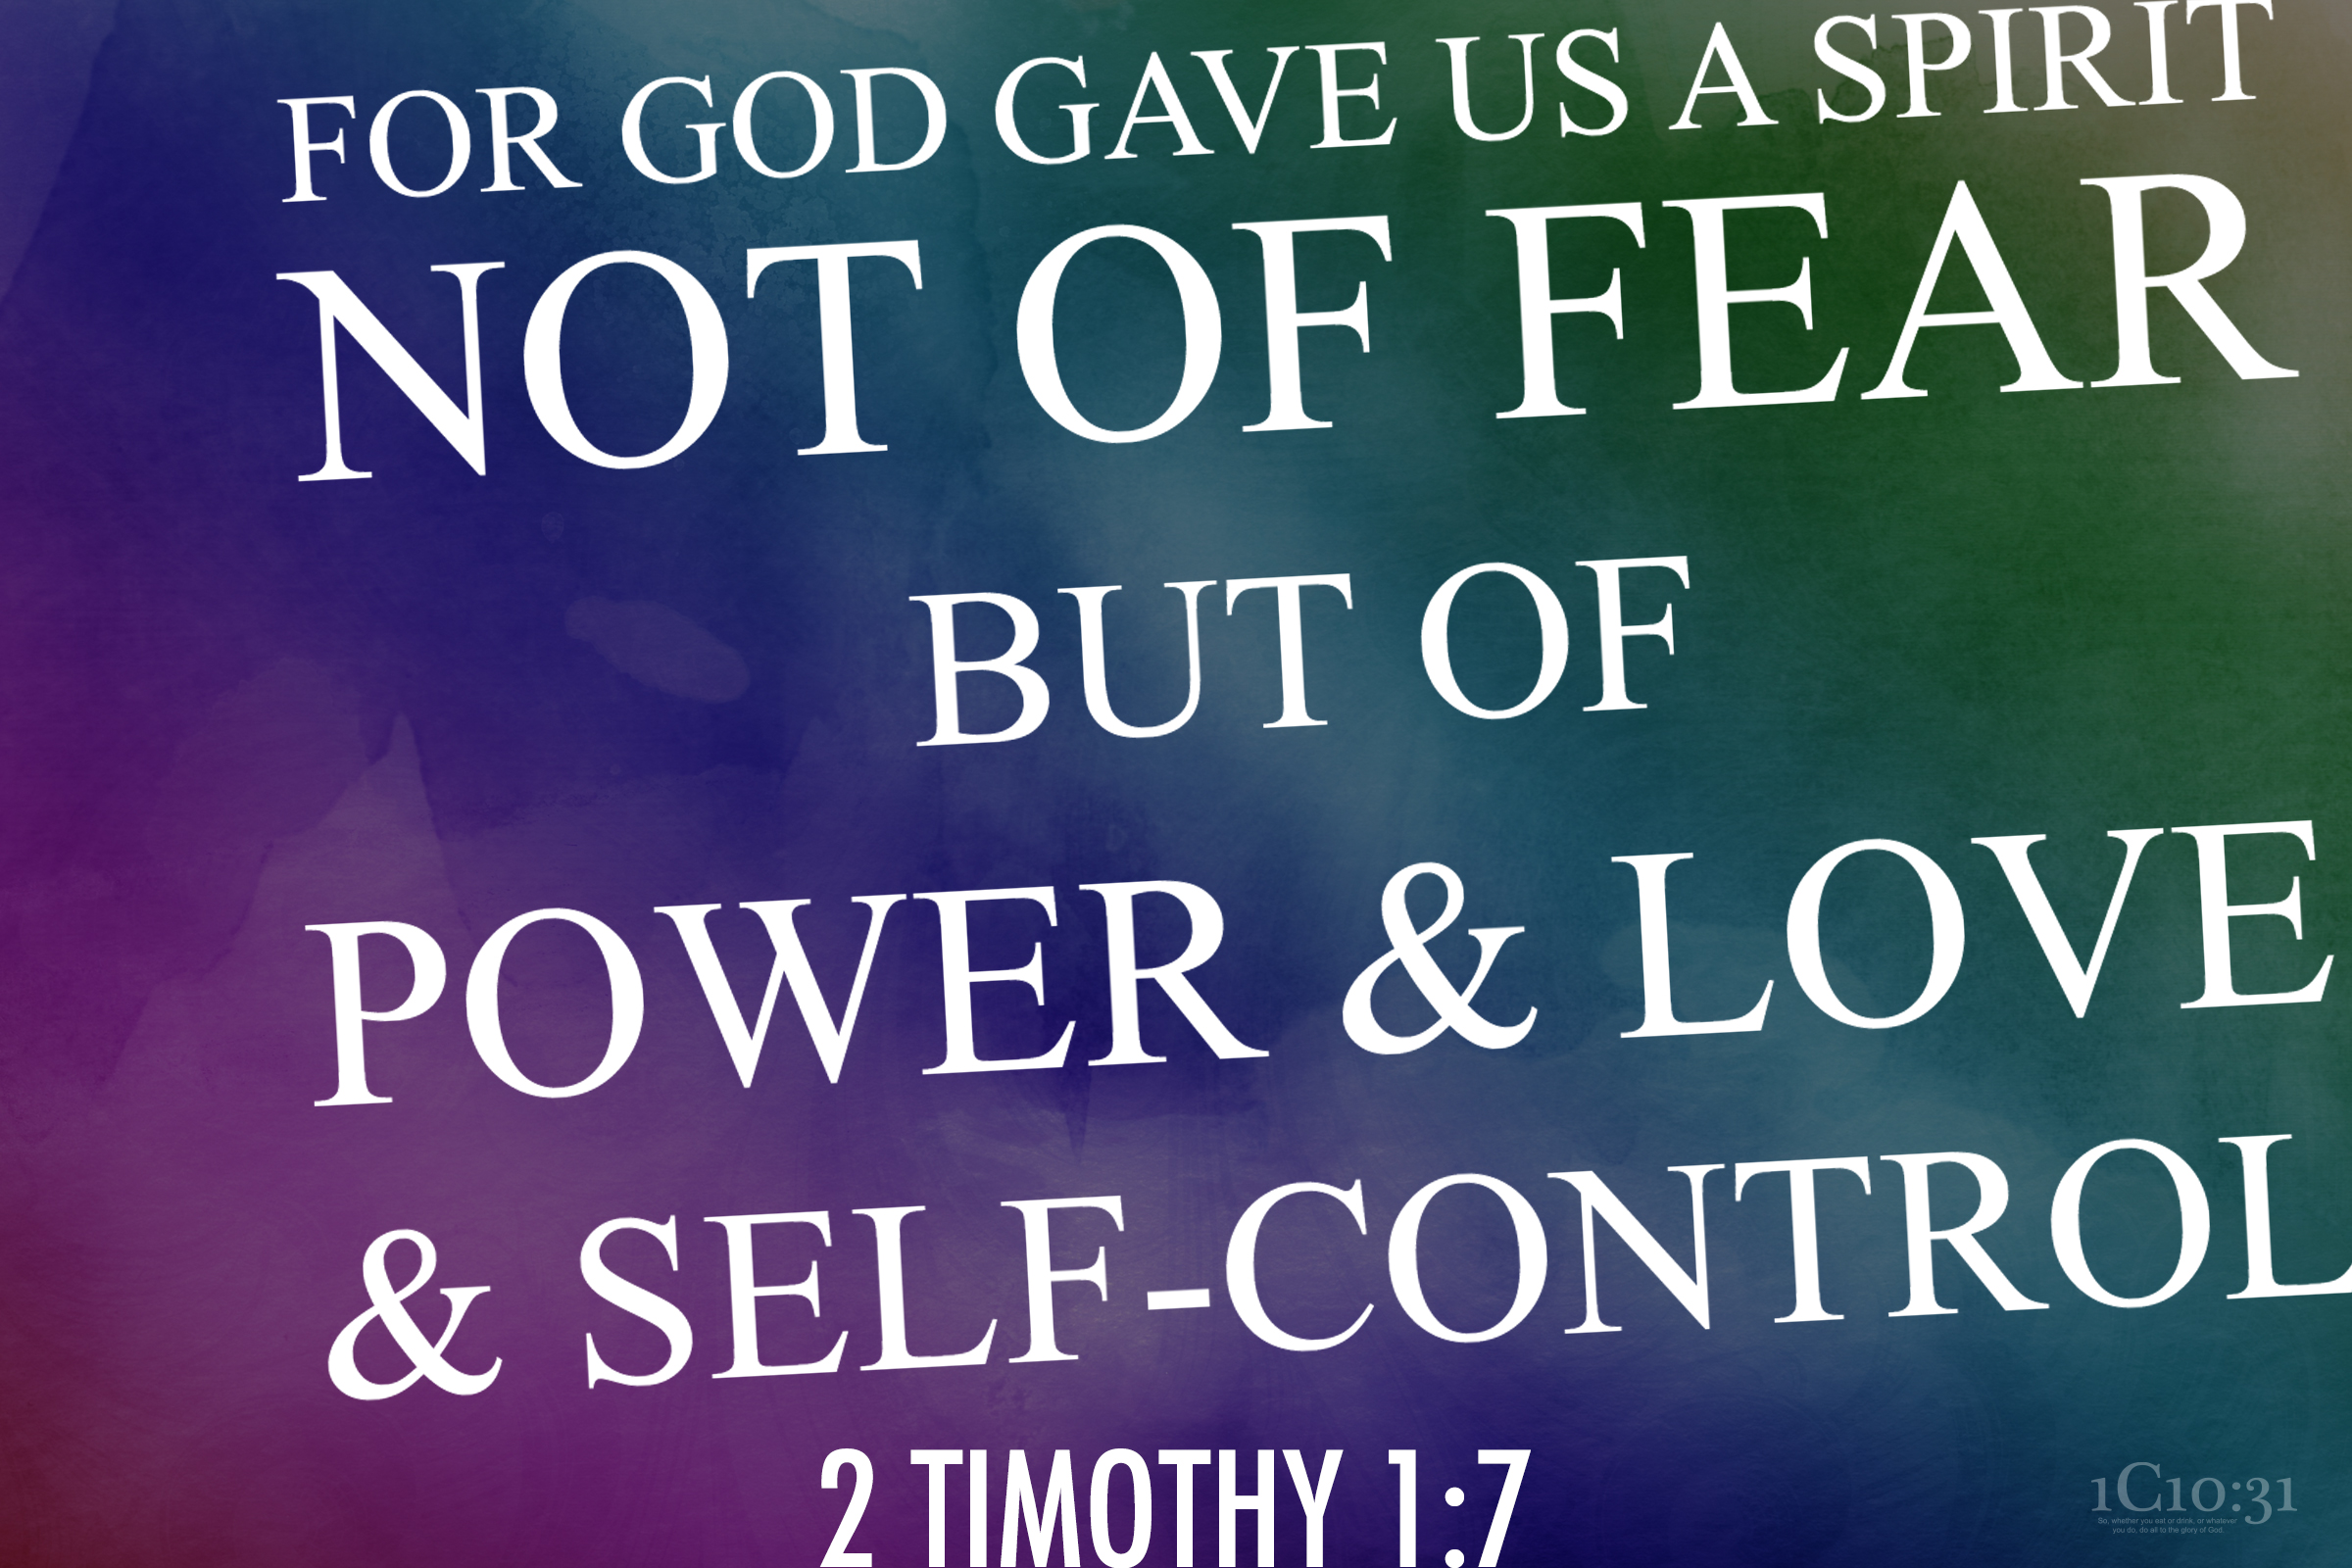 2 Timothy 1:7 for God gave us a spirit not of fear but of power and love and self-control.